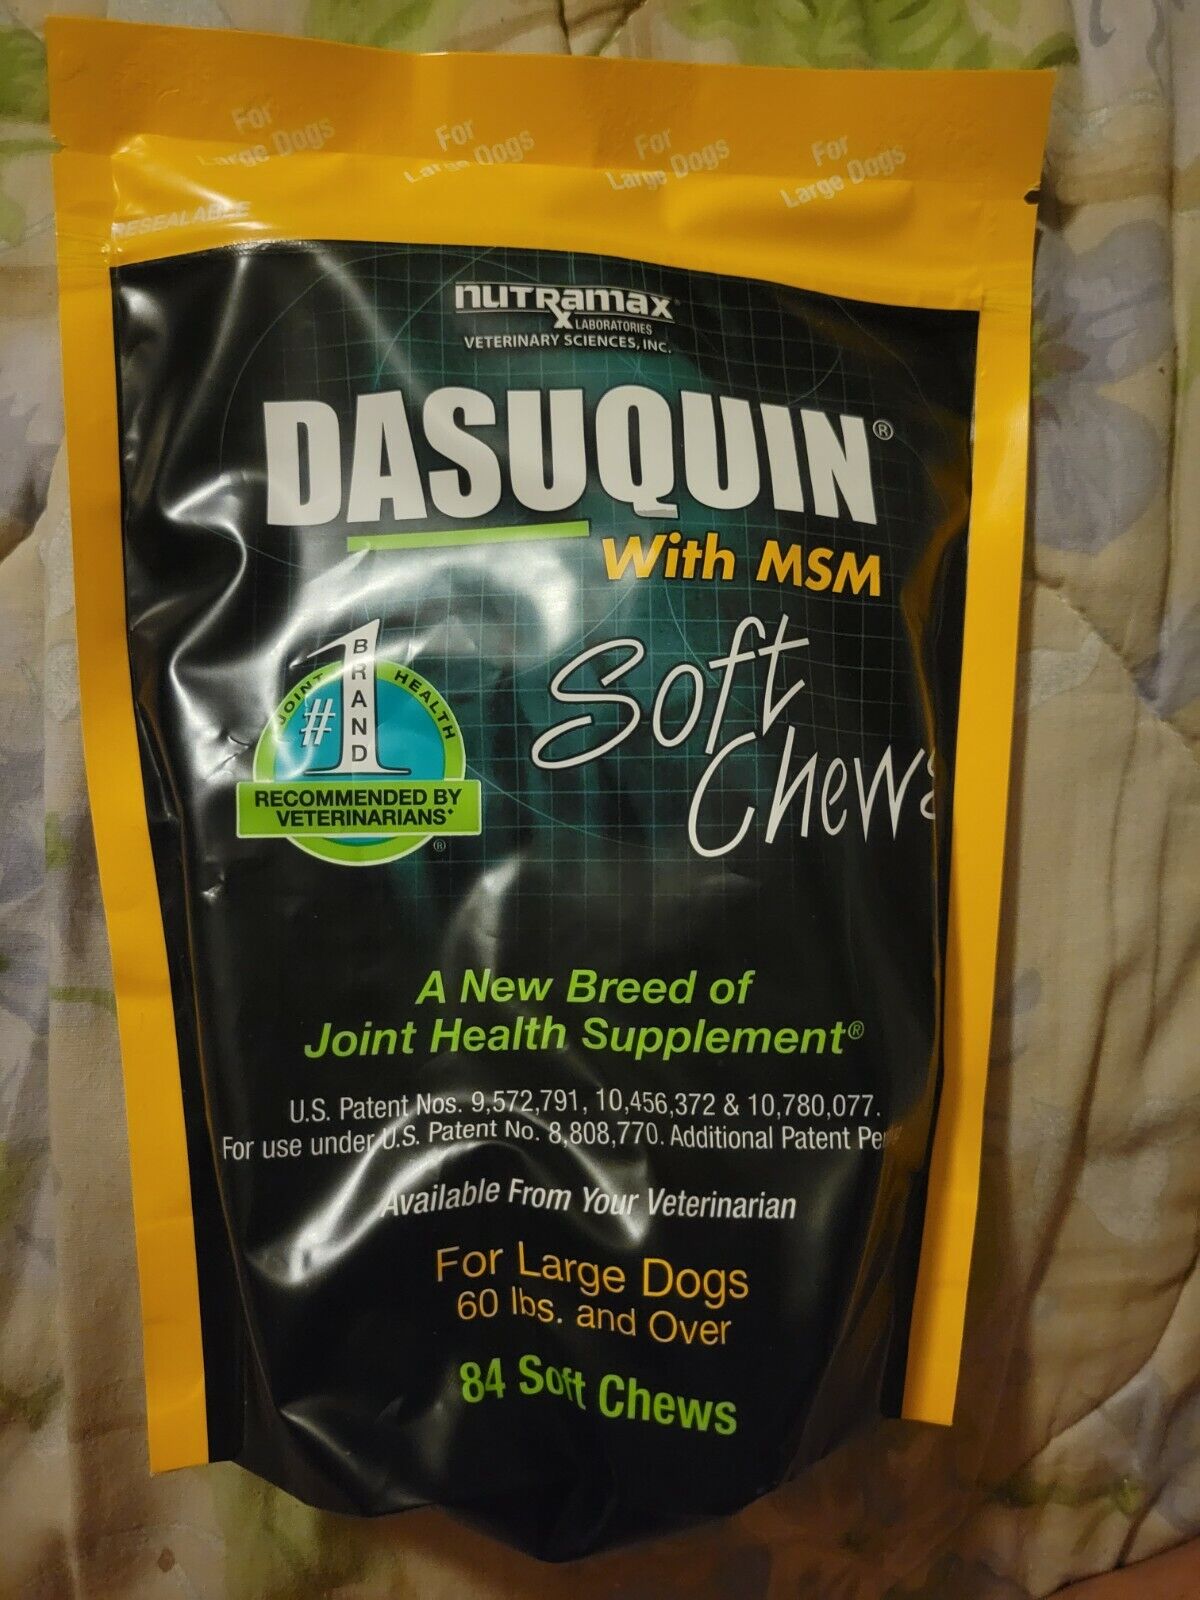 Nutramax Dasuquin with MSM Joint Health Supp for Large Dogs, 84 Soft Chews 